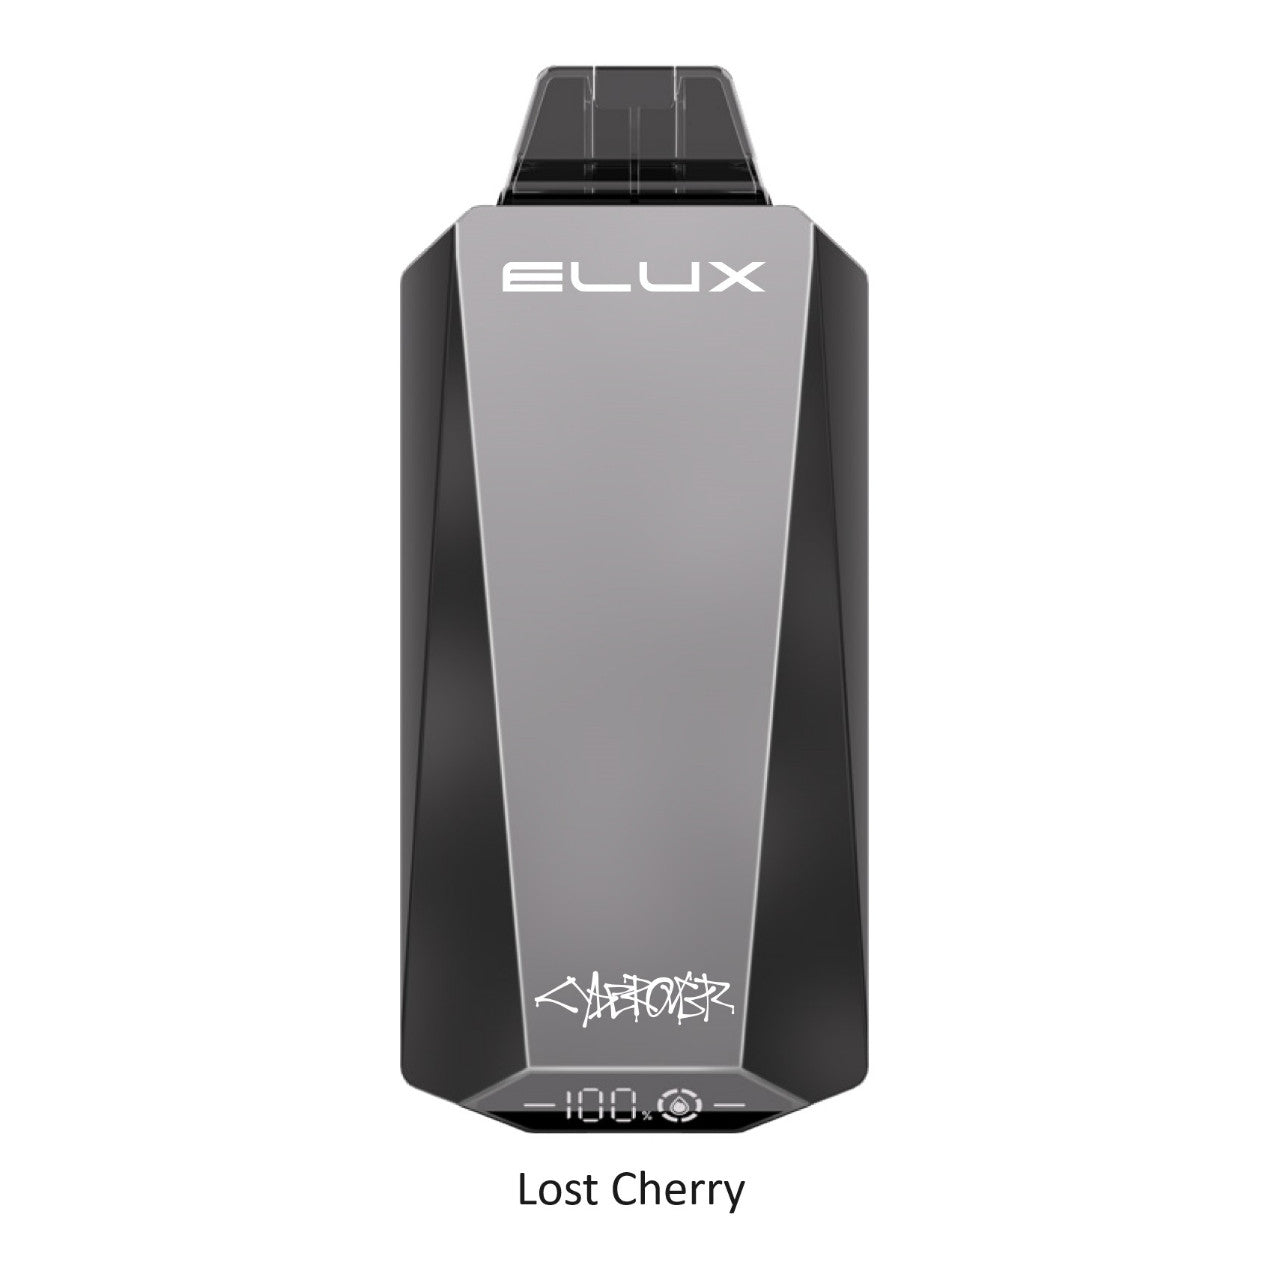 Elux CYBEROVER 18000 Puffs Disposable 5% | Lost Cherry